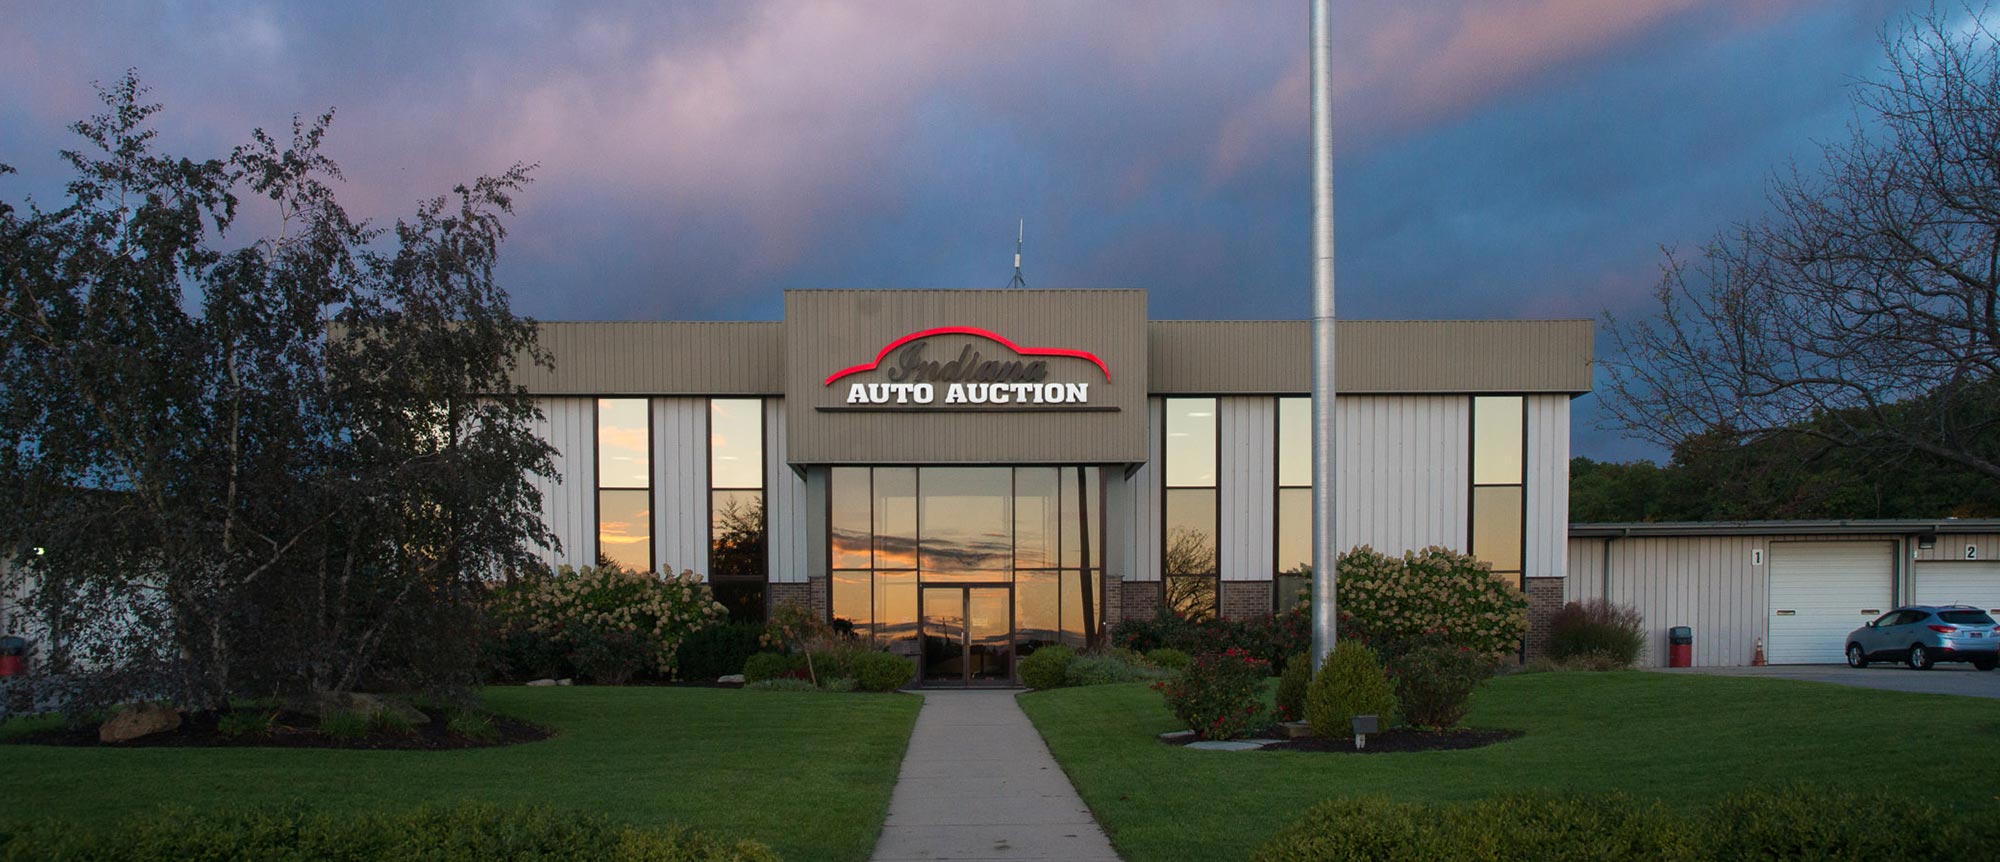 Indiana Auto Auction Building Front